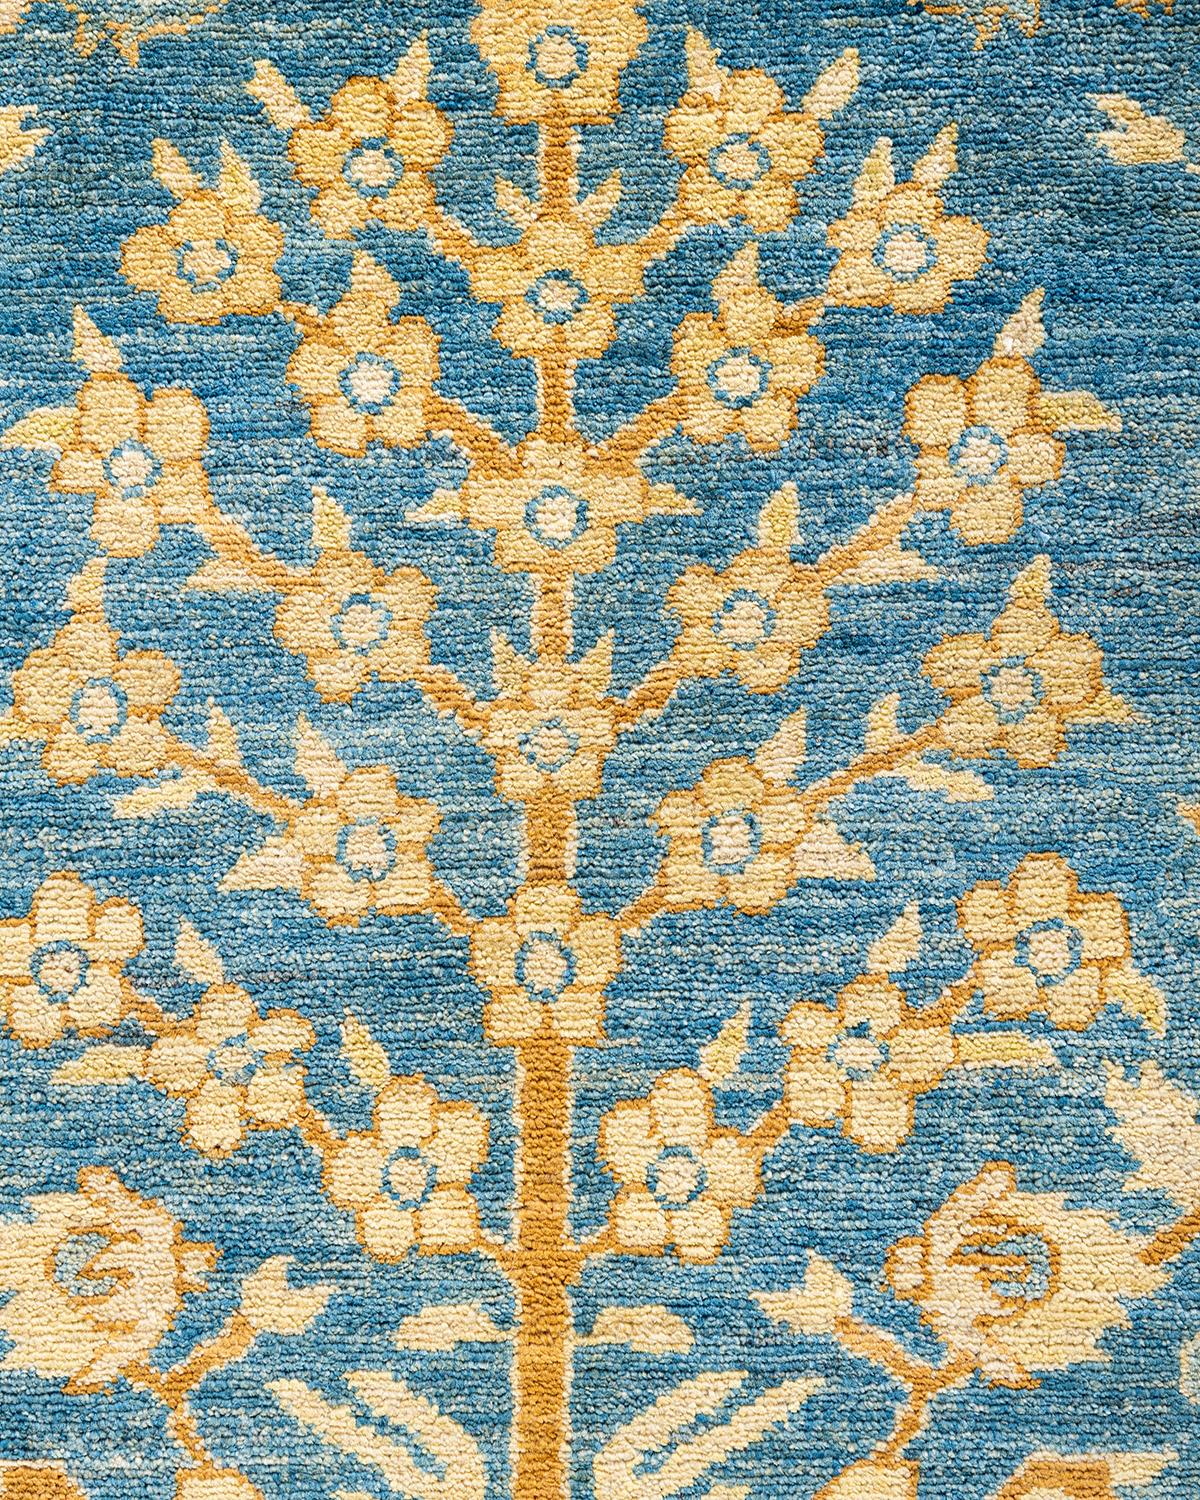 Contemporary Eclectic Hand Knotted Wool Blue Square Area Rug  (Pakistanisch) im Angebot